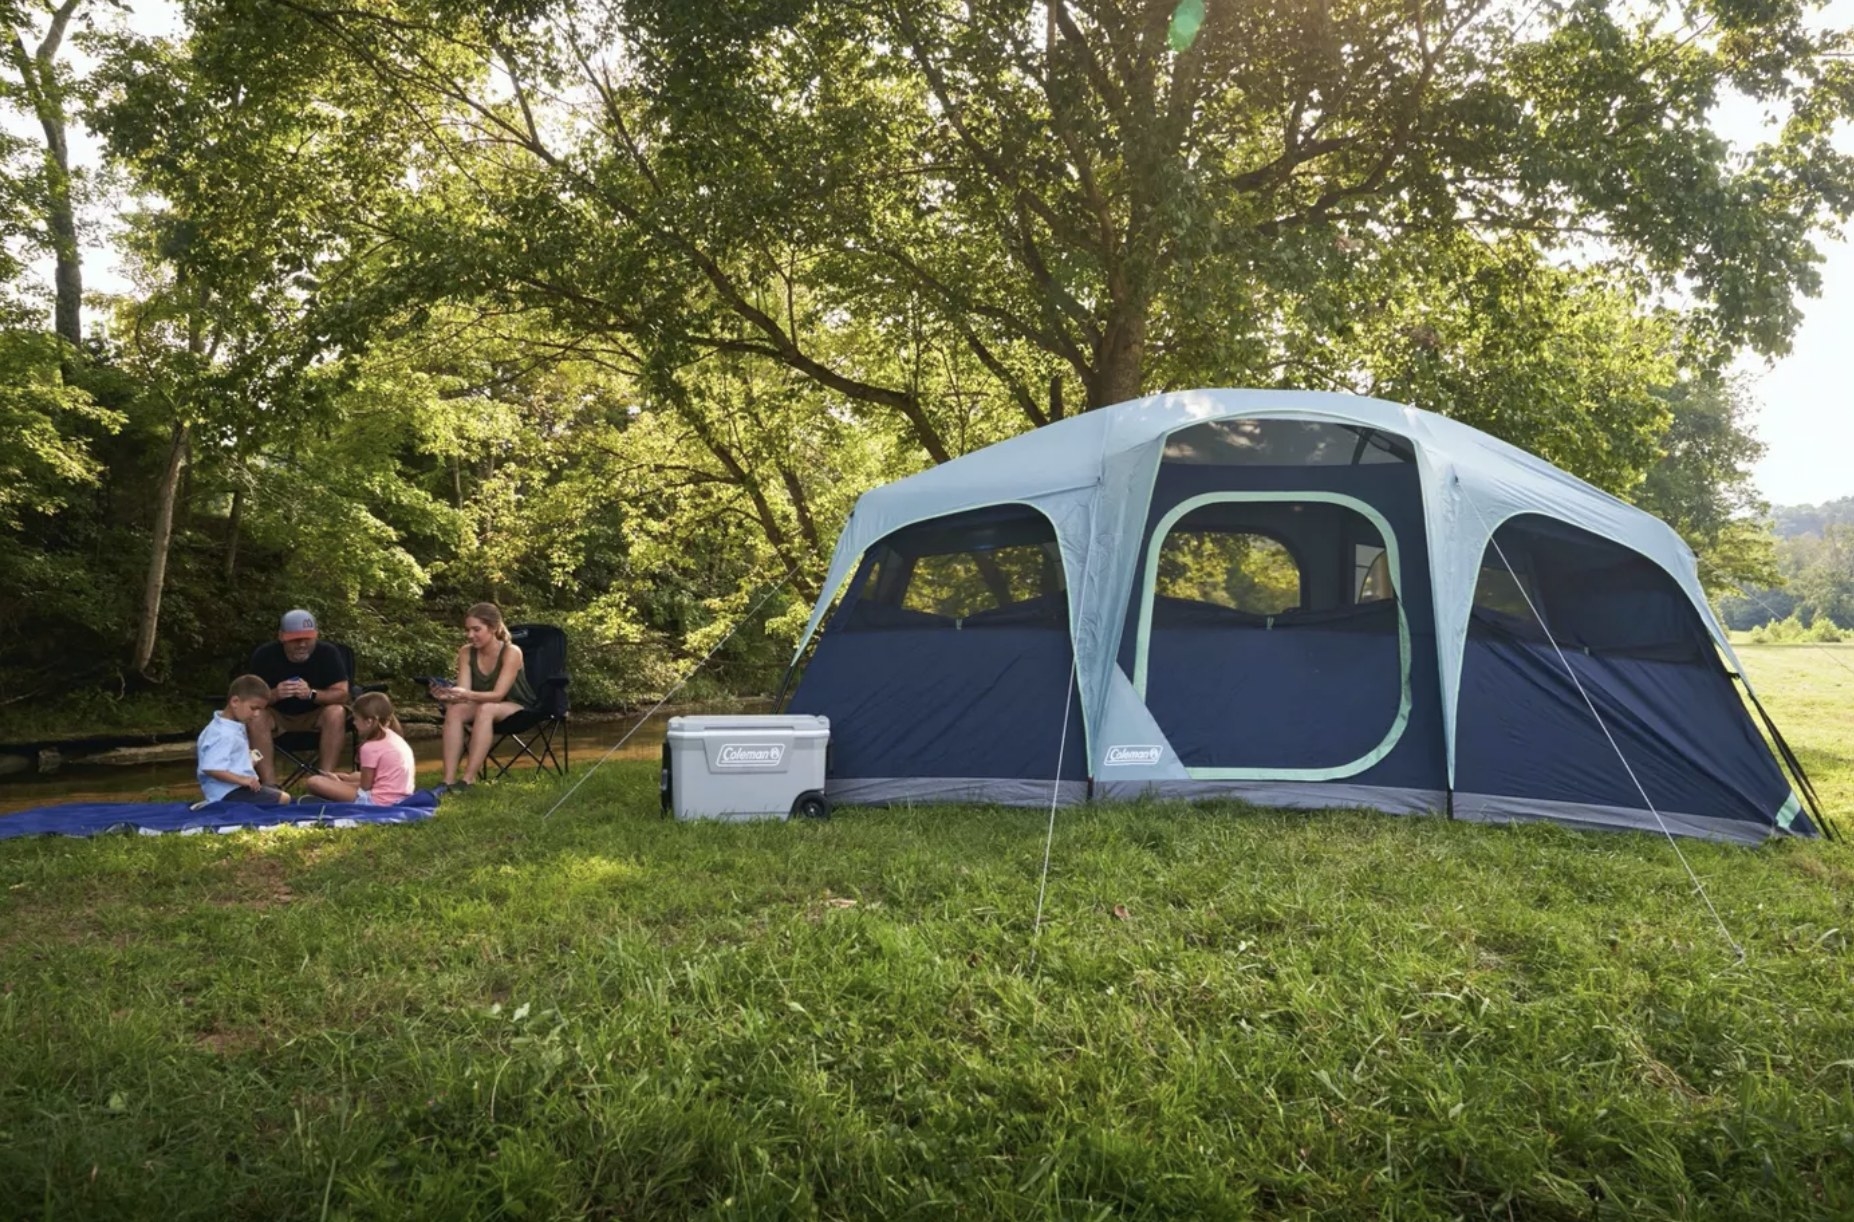 The 10-person Coleman tent